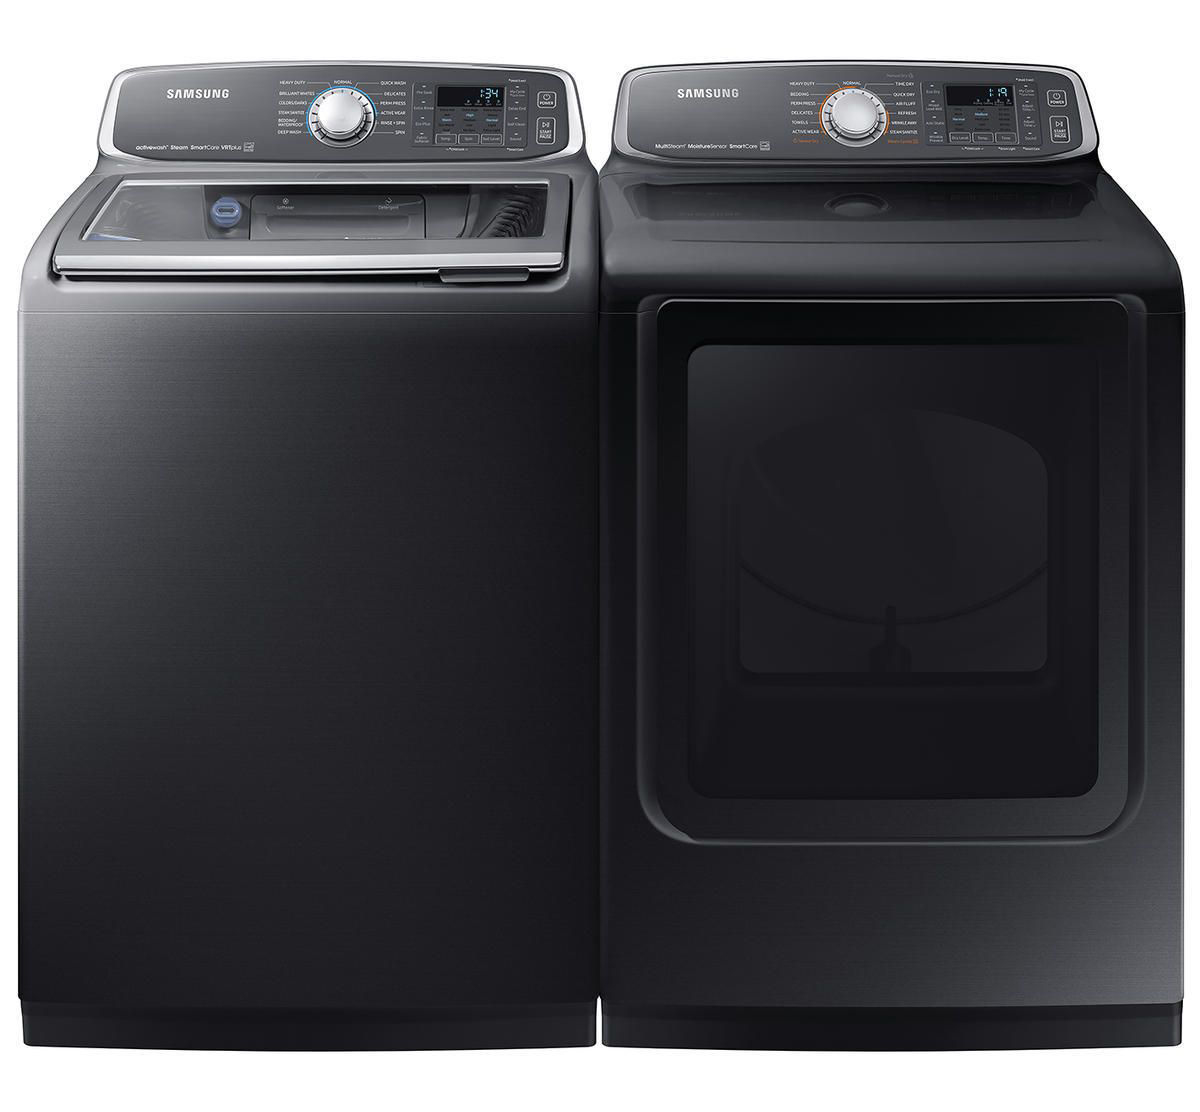 Samsung Top Washer Dryer Pair Badcock Home Furniture &more